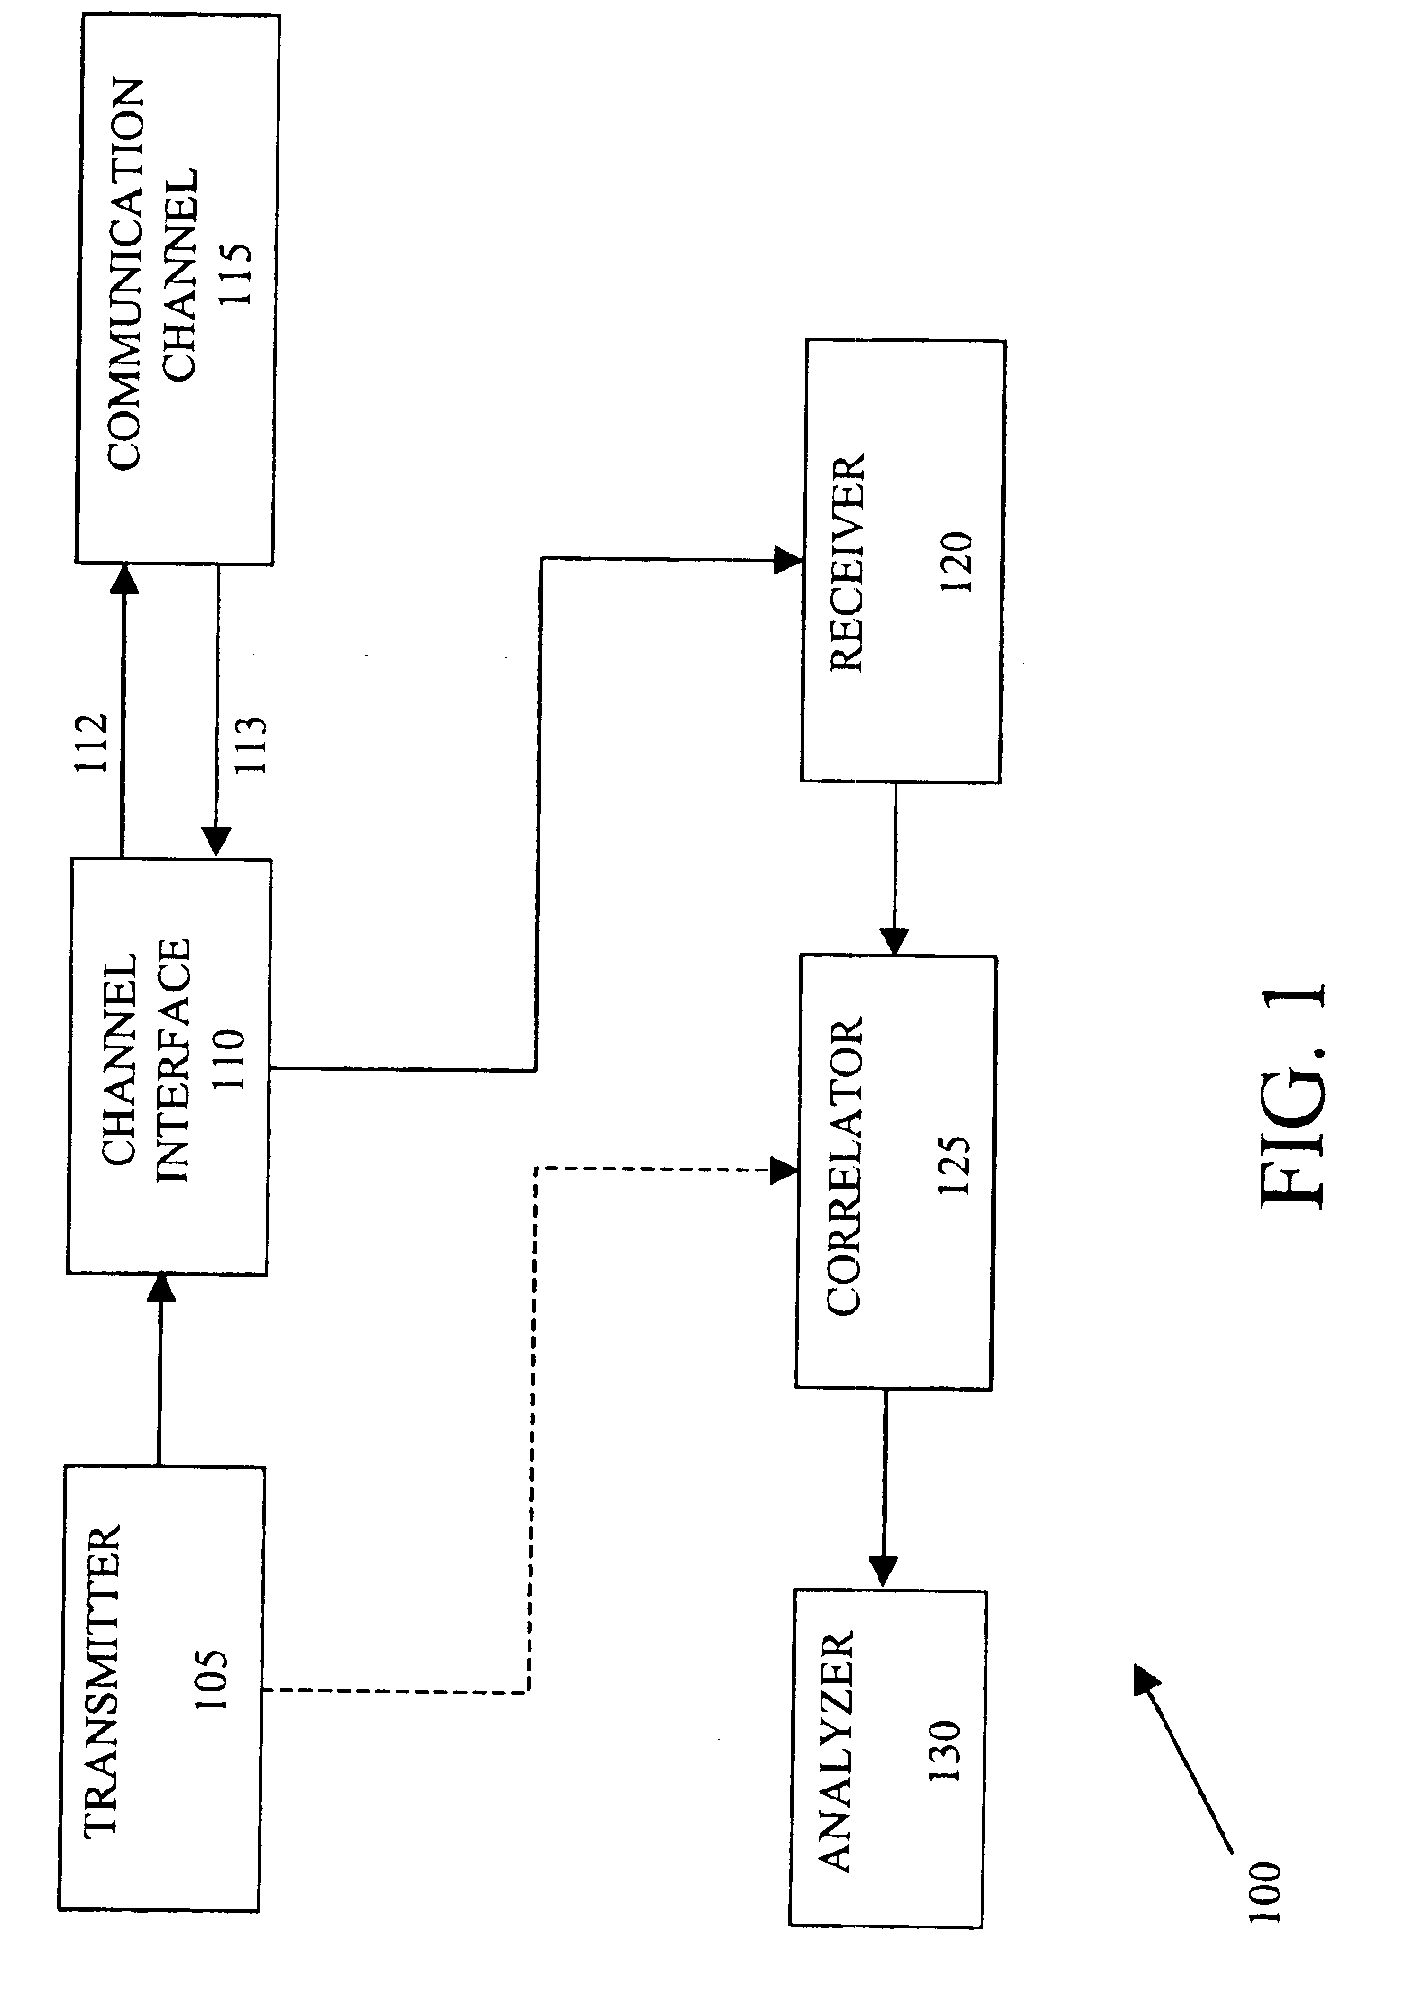 System and method for locating and determining discontinuities and estimating loop loss in a communications medium using frequency domain correlation